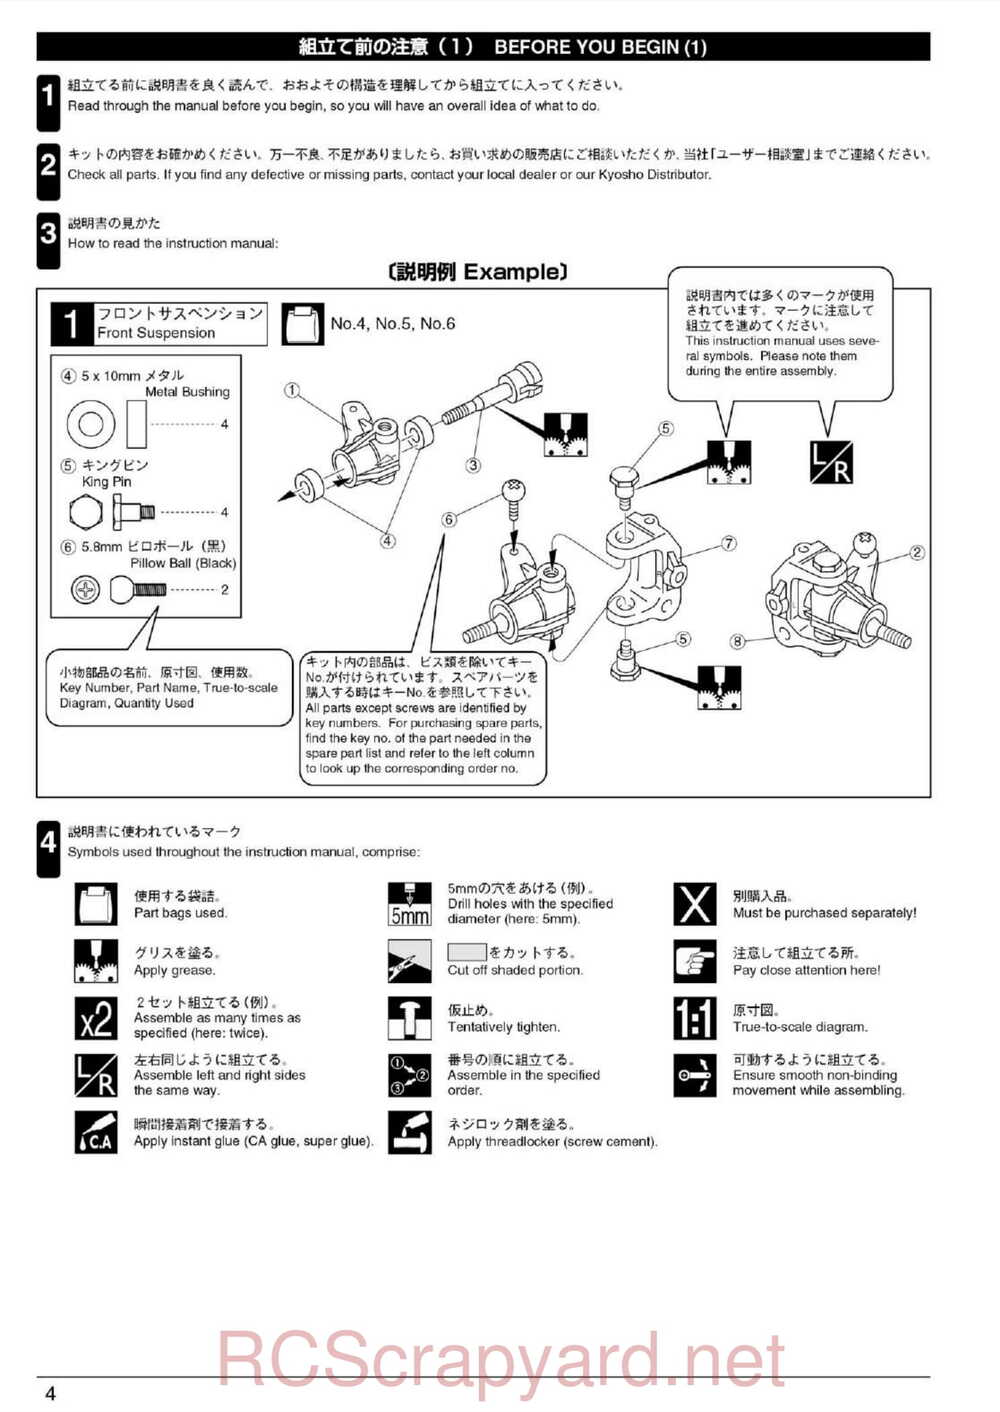 Kyosho - 30074 - Ultima-RB5 - Manual - Page 04